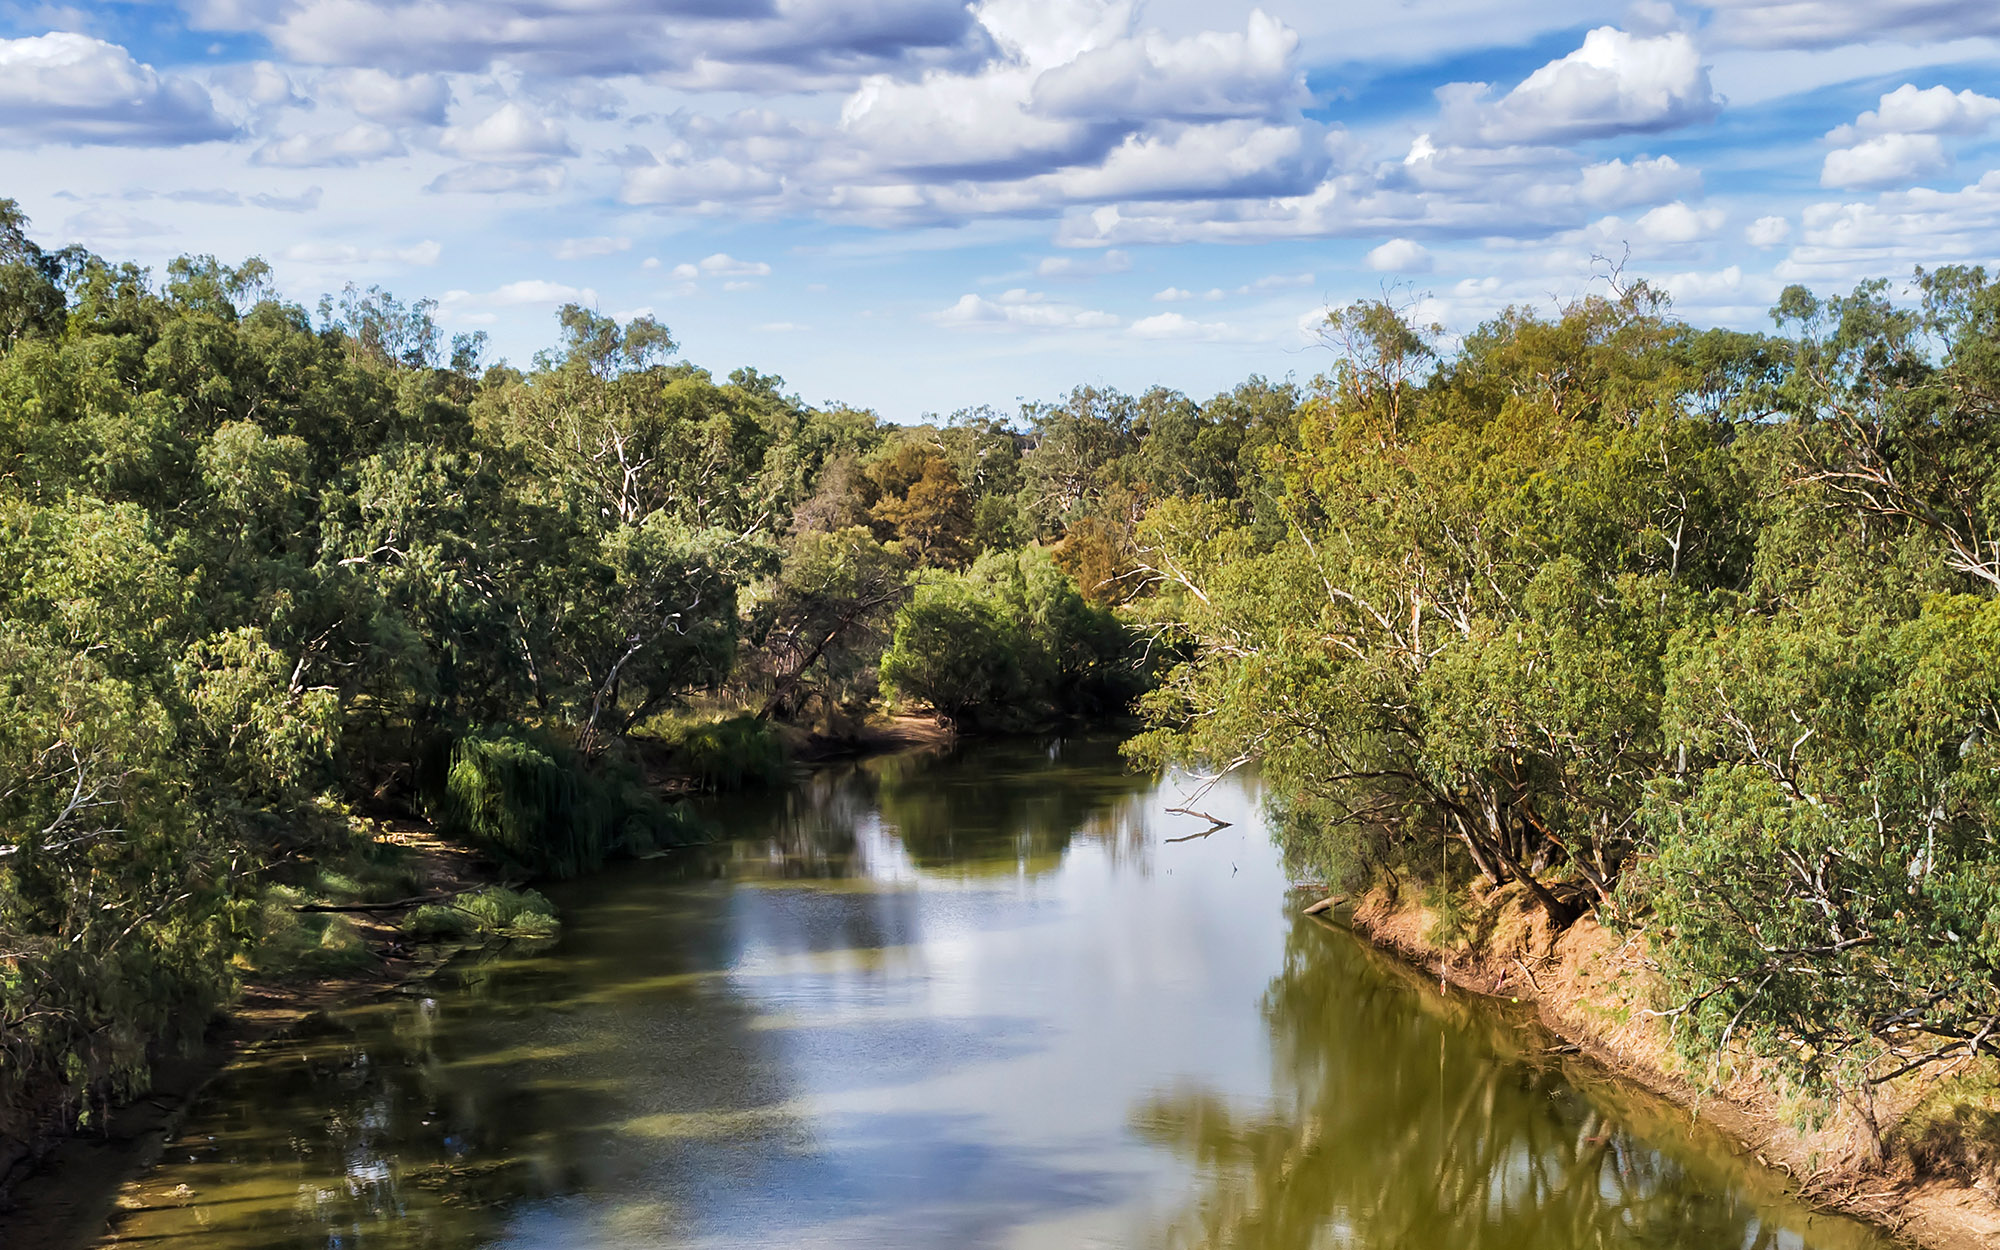 Gwydir River in Narrabri shire around Moree town, New South Wales.